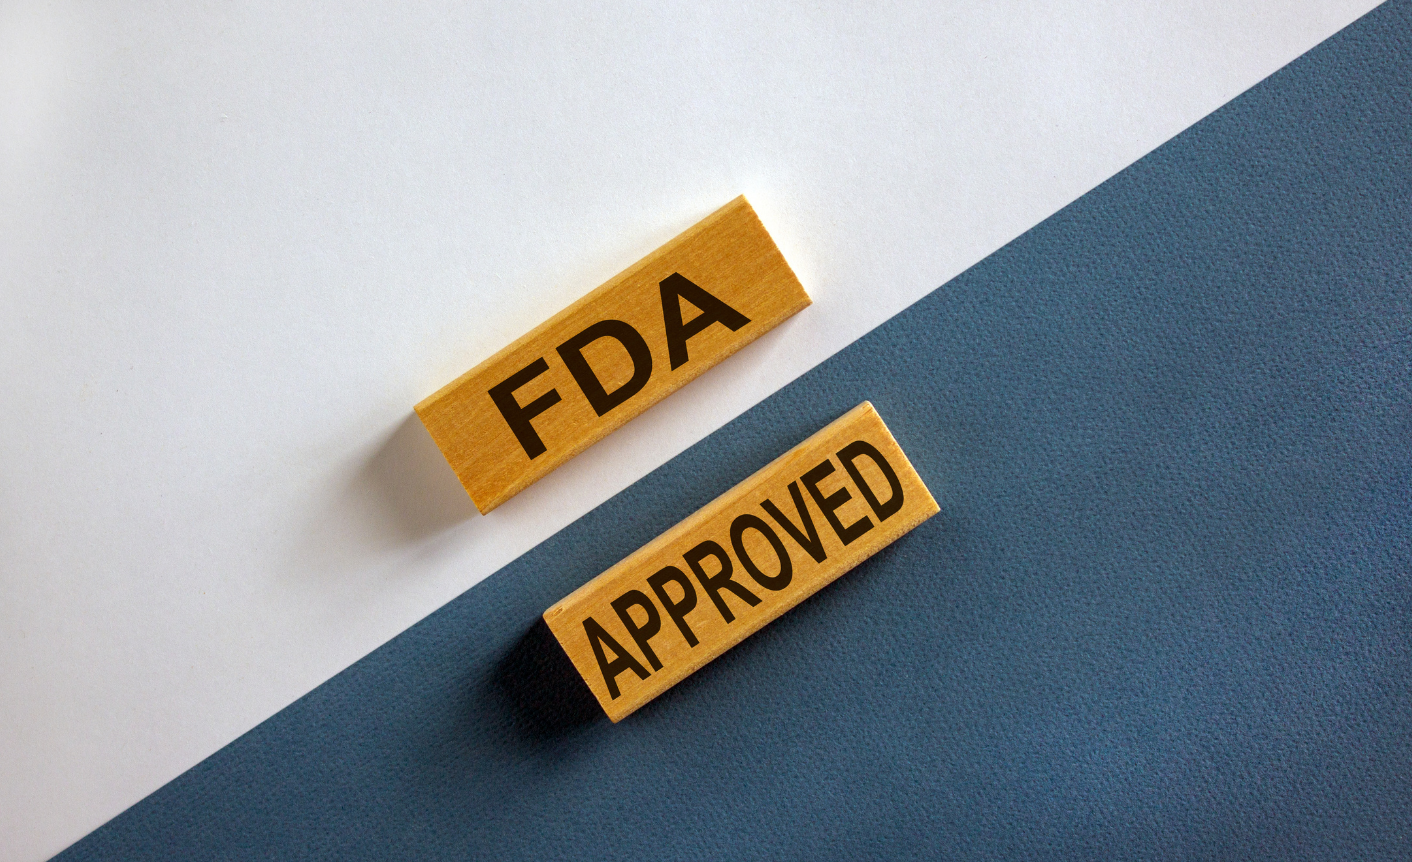 Featured image that shows two wooden bricks on a black-white background with copy on them: "FDA APPROVED"